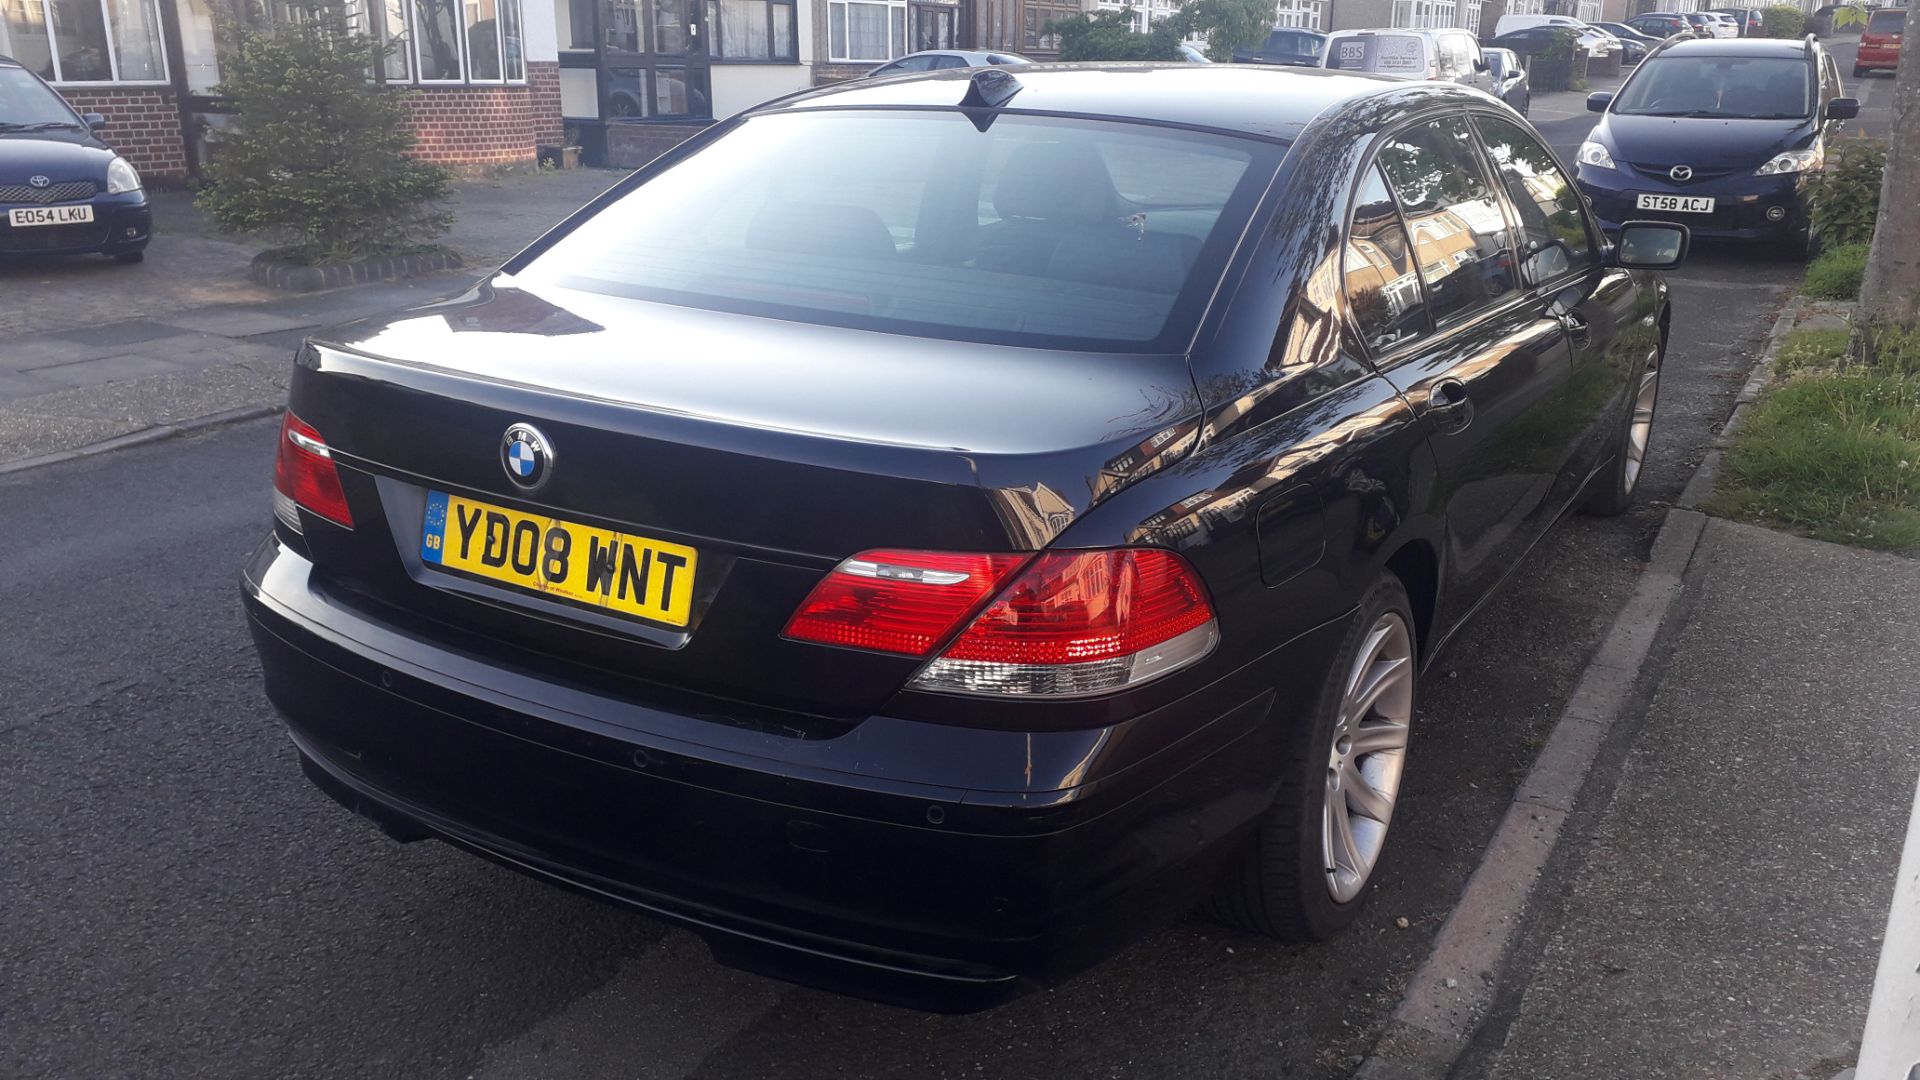 BMW 730Ld SE 4 Door Auto Saloon, colour black, registration YD08 WNT, first registered 21 March - Image 32 of 32